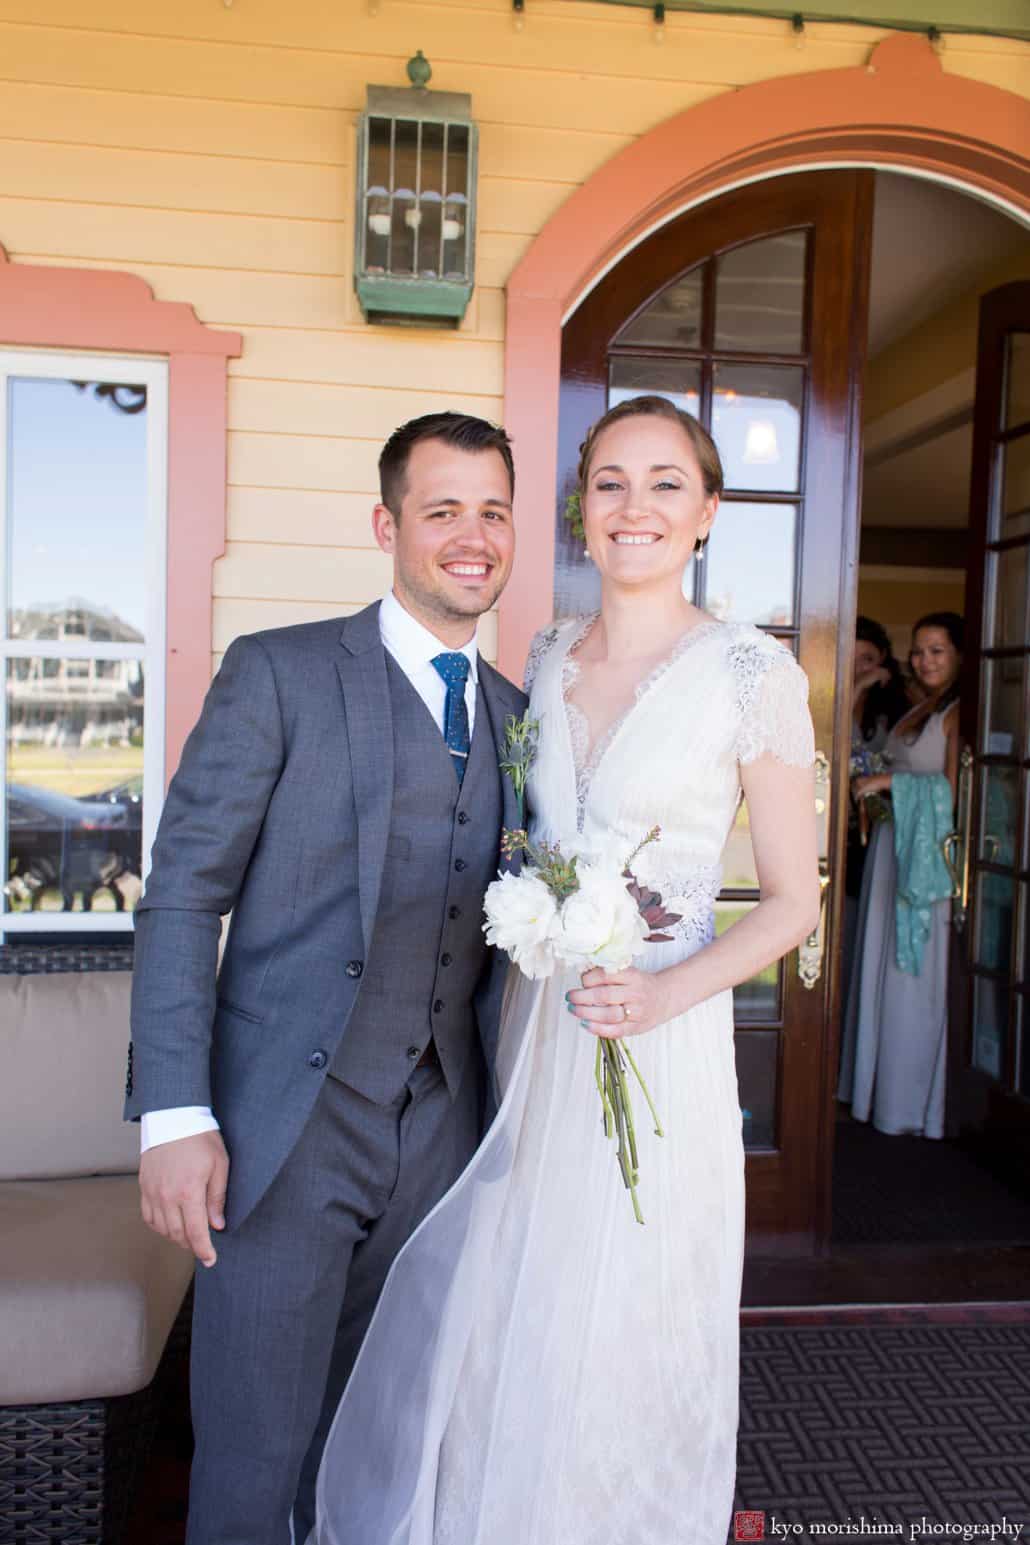 Portrait of the bride and groom on the Ocean Plaza Hotel front porch in Asbury Park, photographed by Kyo Morishima